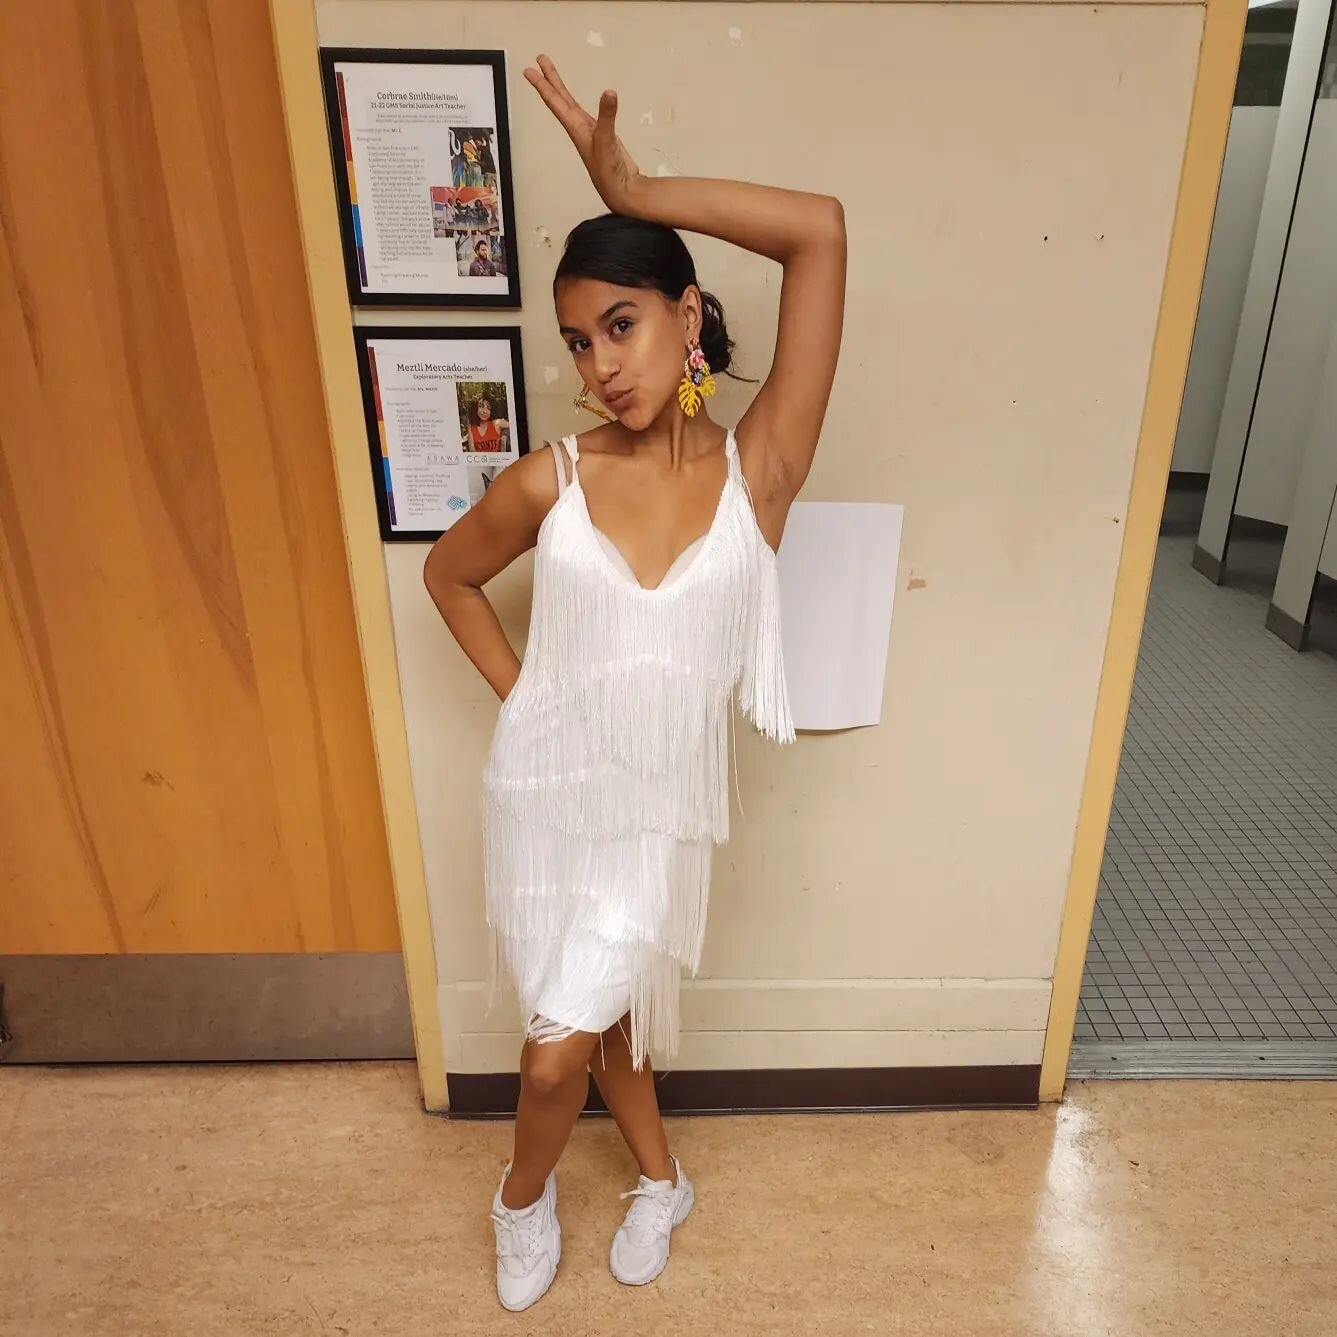 ARTIST SPOTLIGHT! 🌟

Congratulations to @risingrhythmsf Dancer @lunaaa.415 for landing a lead dance role as a Shark Girl in West Side Story with @throckmortontheatre March 2023!